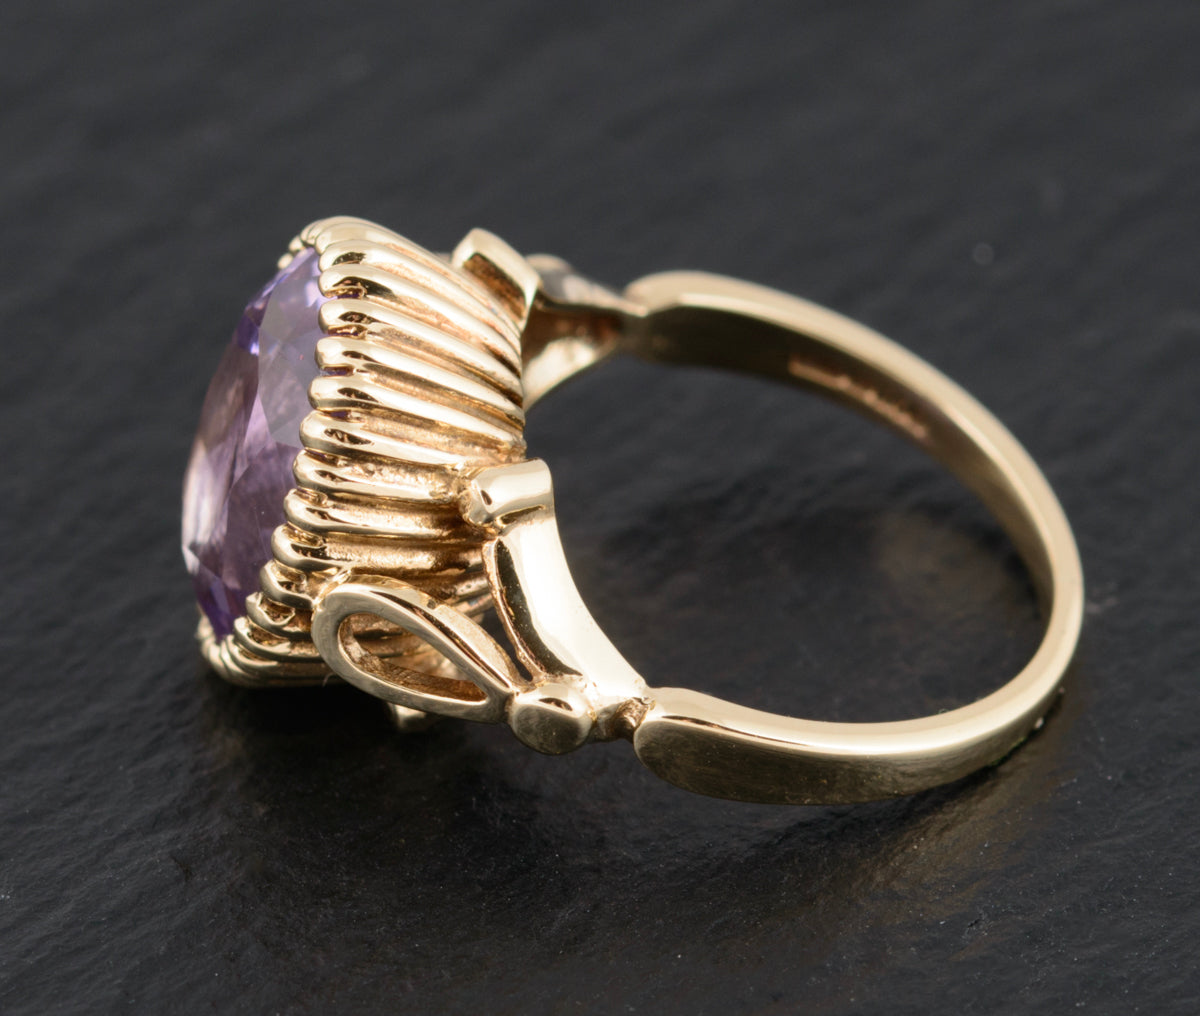 Vintage 9ct Gold Ring With Natural Amethyst Gemstone & Decorative Mount  (A1505)